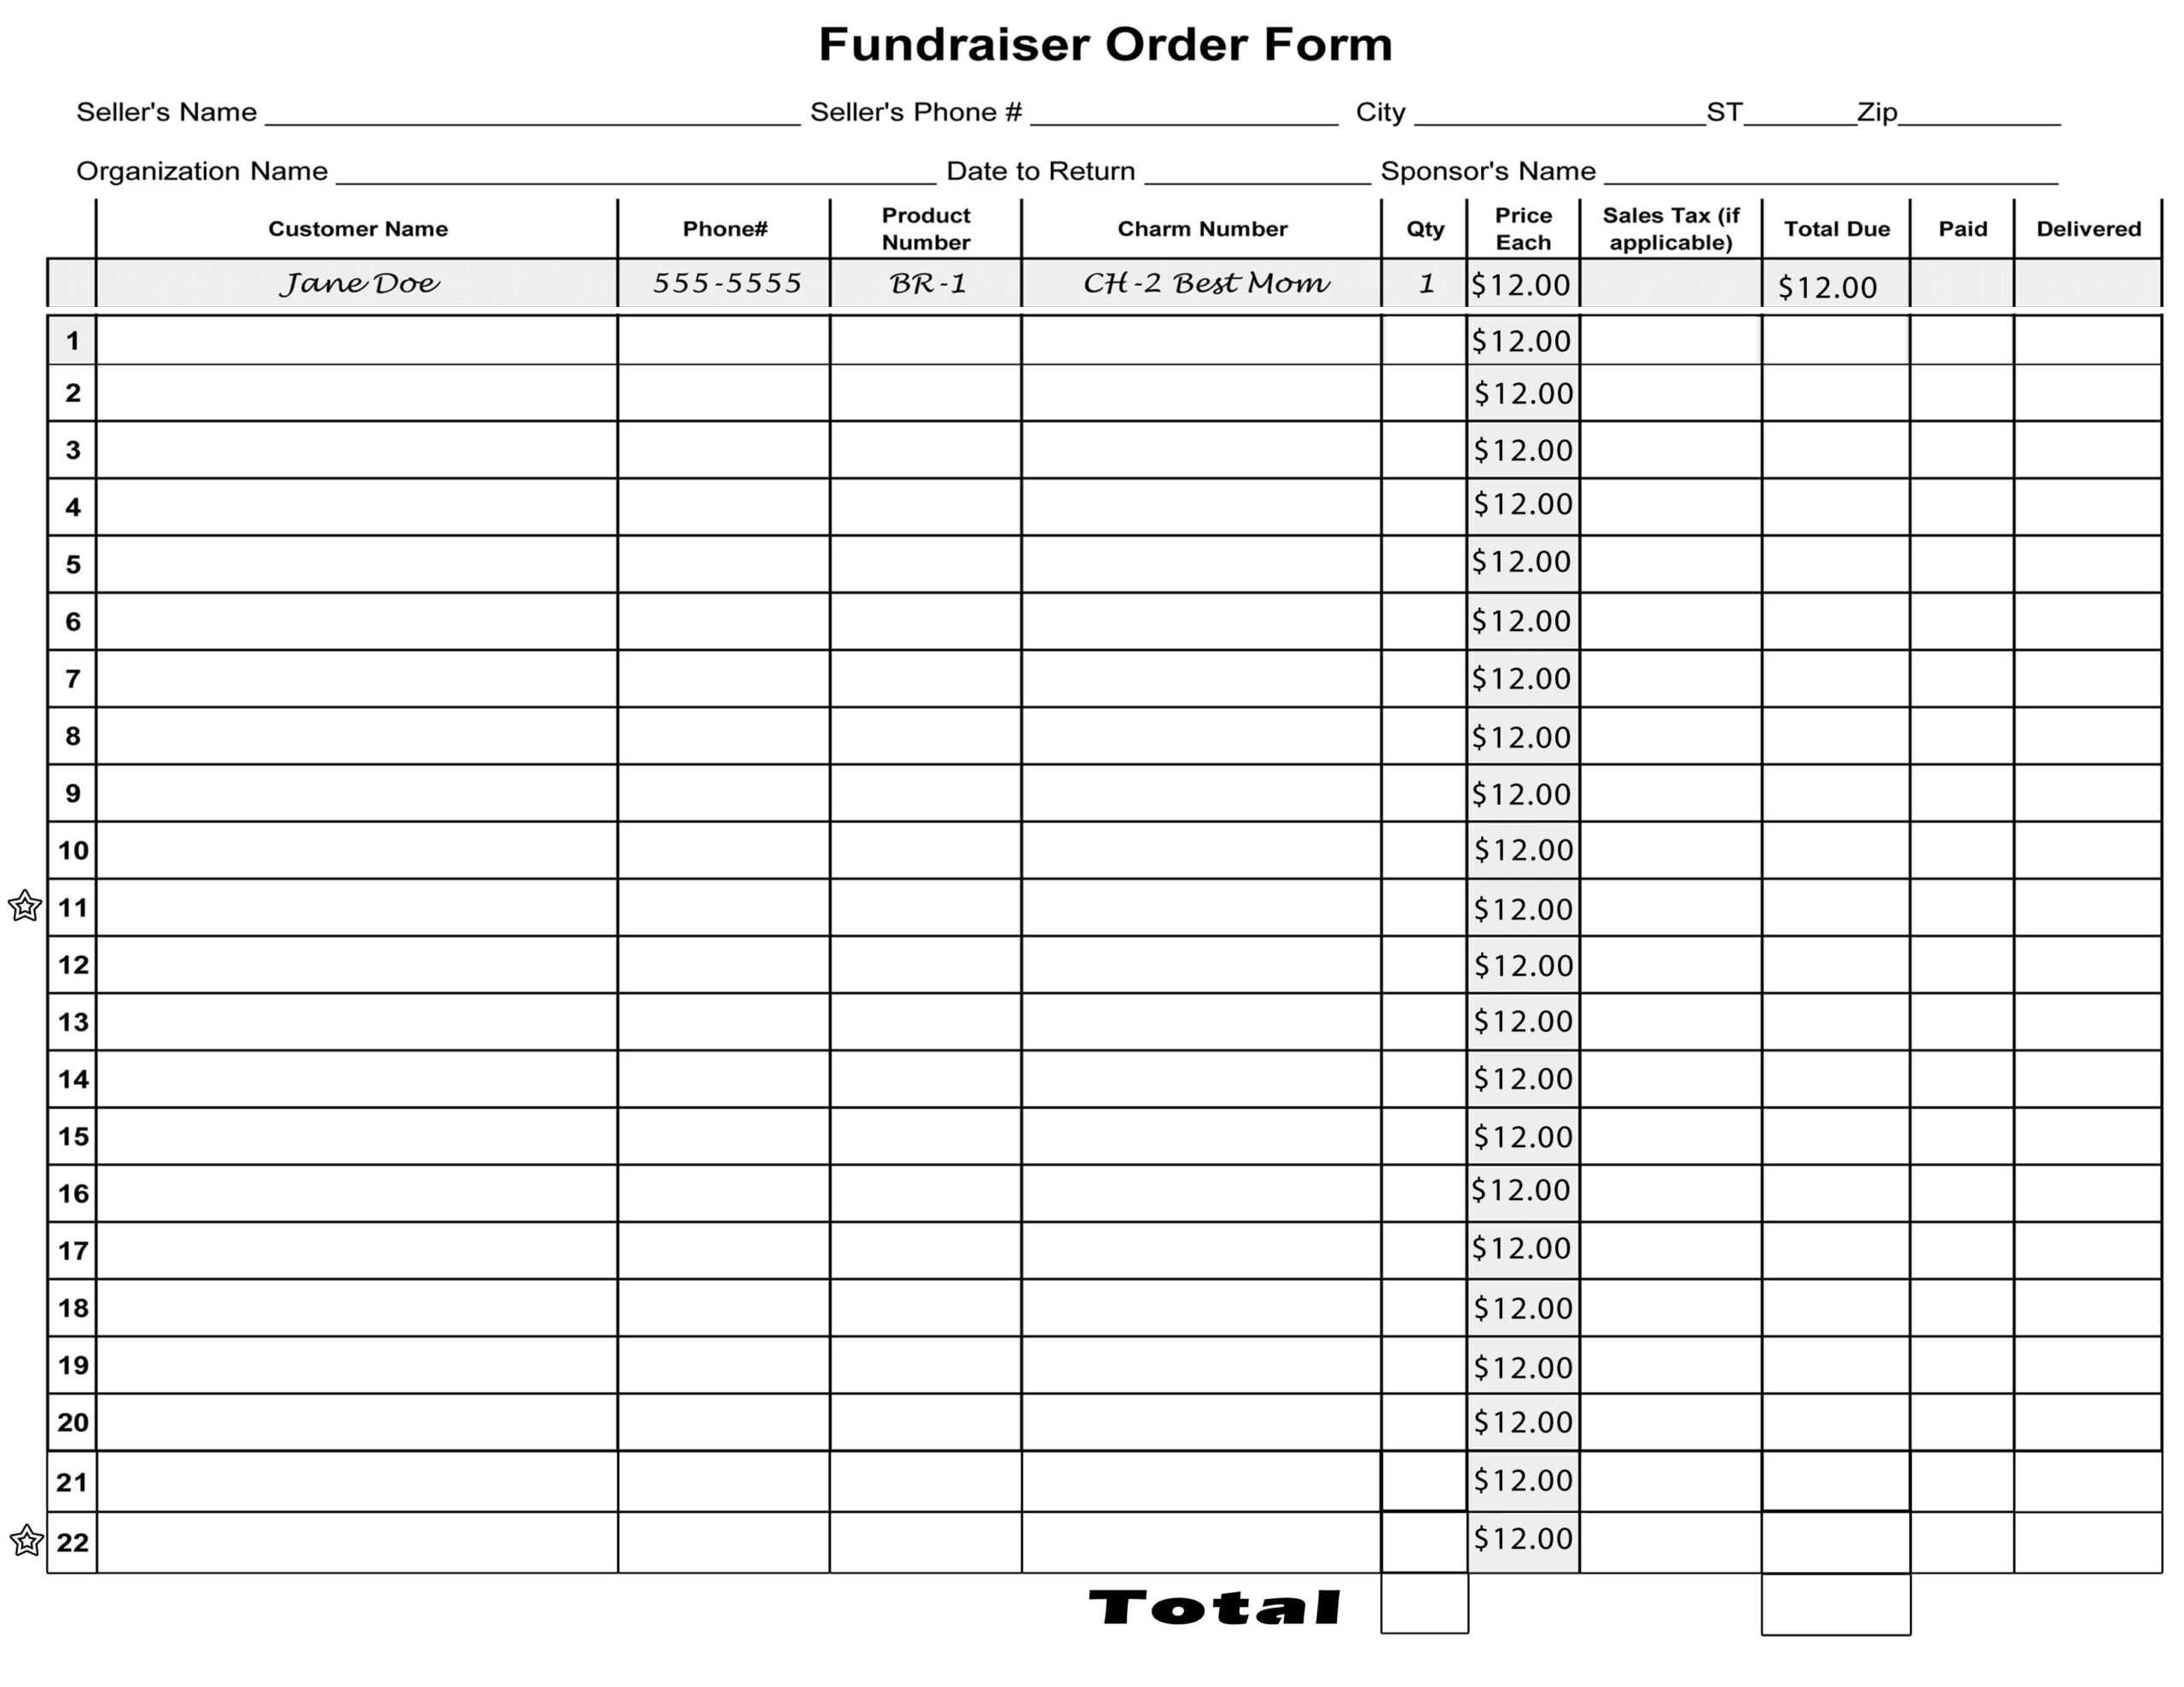 Free Blank Order Form Template | Blank Fundraiser Order Form Regarding Blank Fundraiser Order Form Template